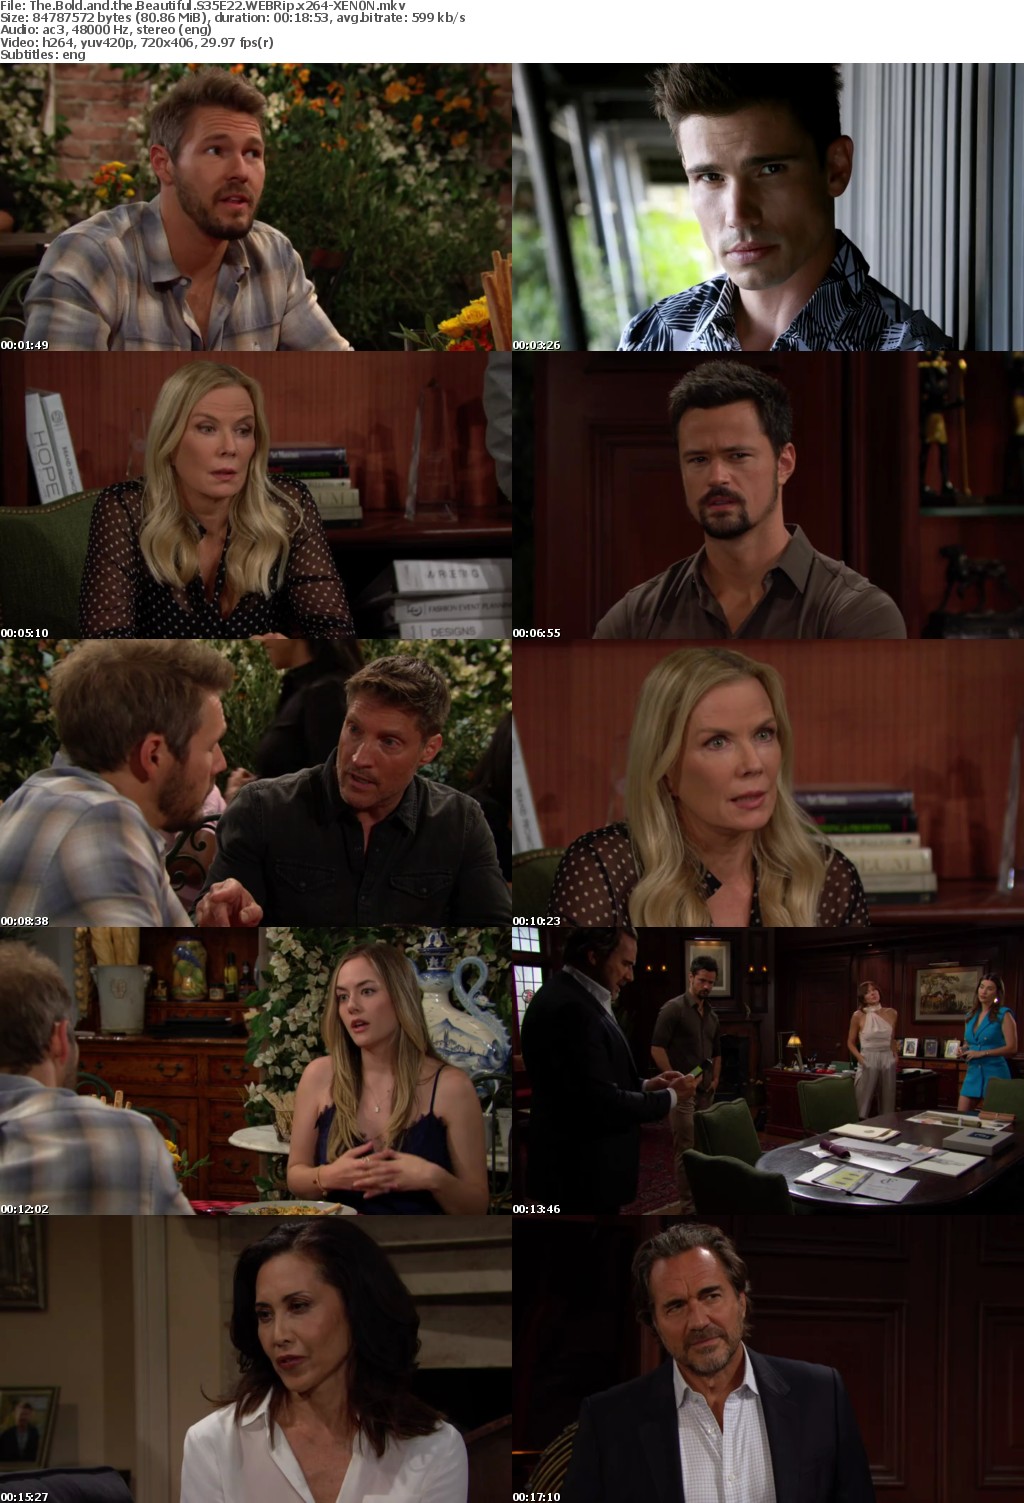 The Bold and the Beautiful S35E22 WEBRip x264-XEN0N